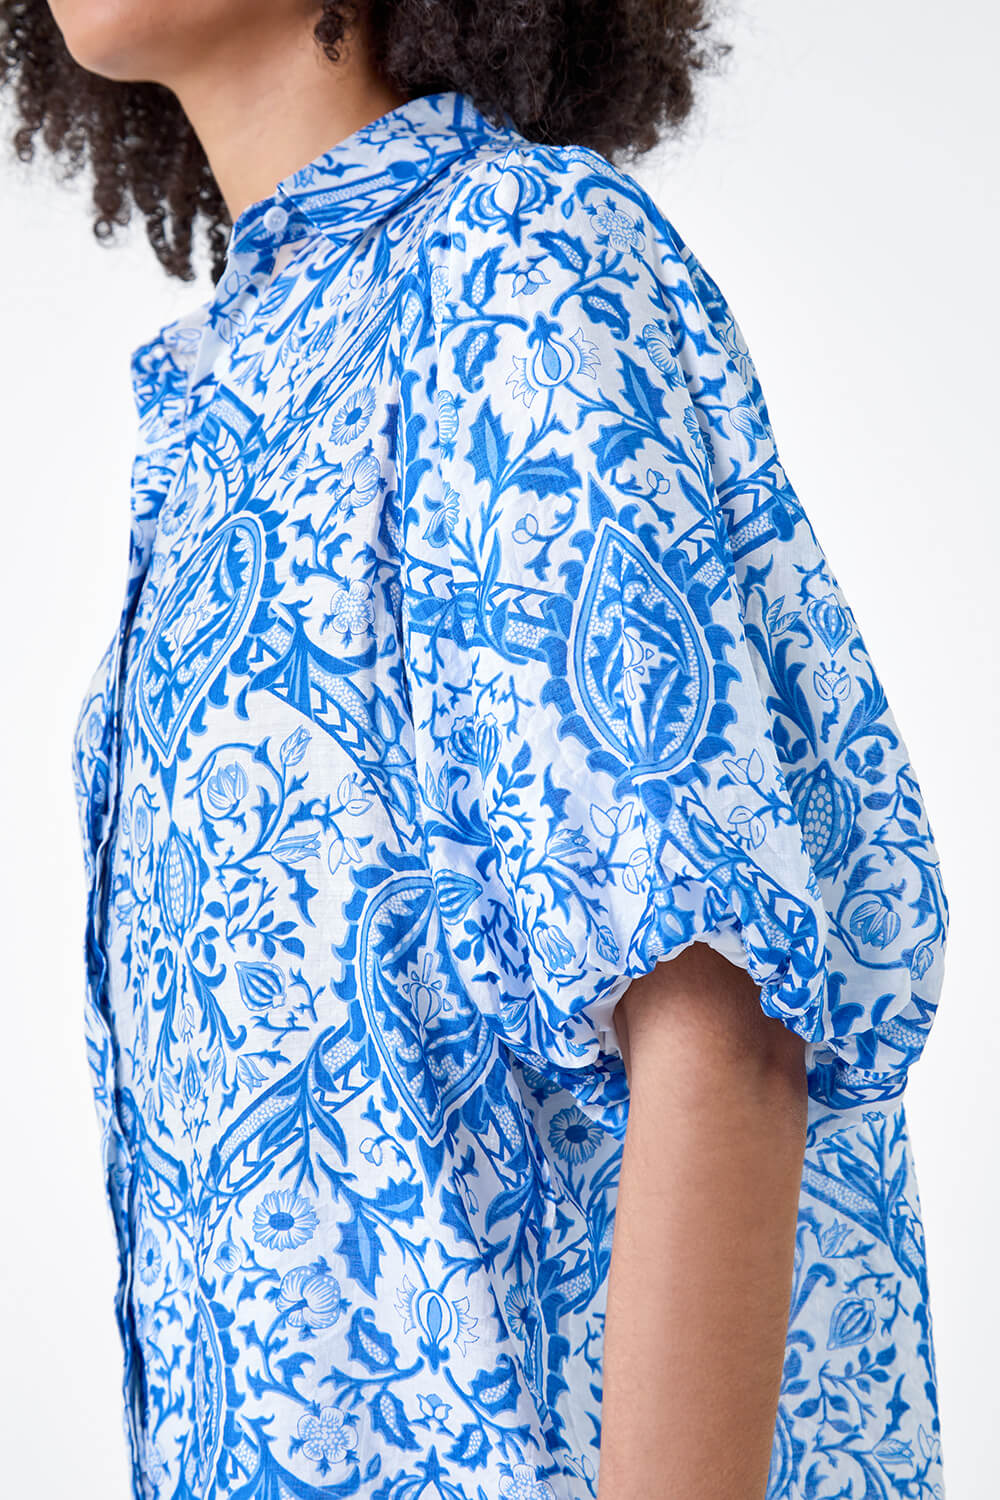 Blue Floral Print Puff Sleeve Shirt, Image 5 of 5